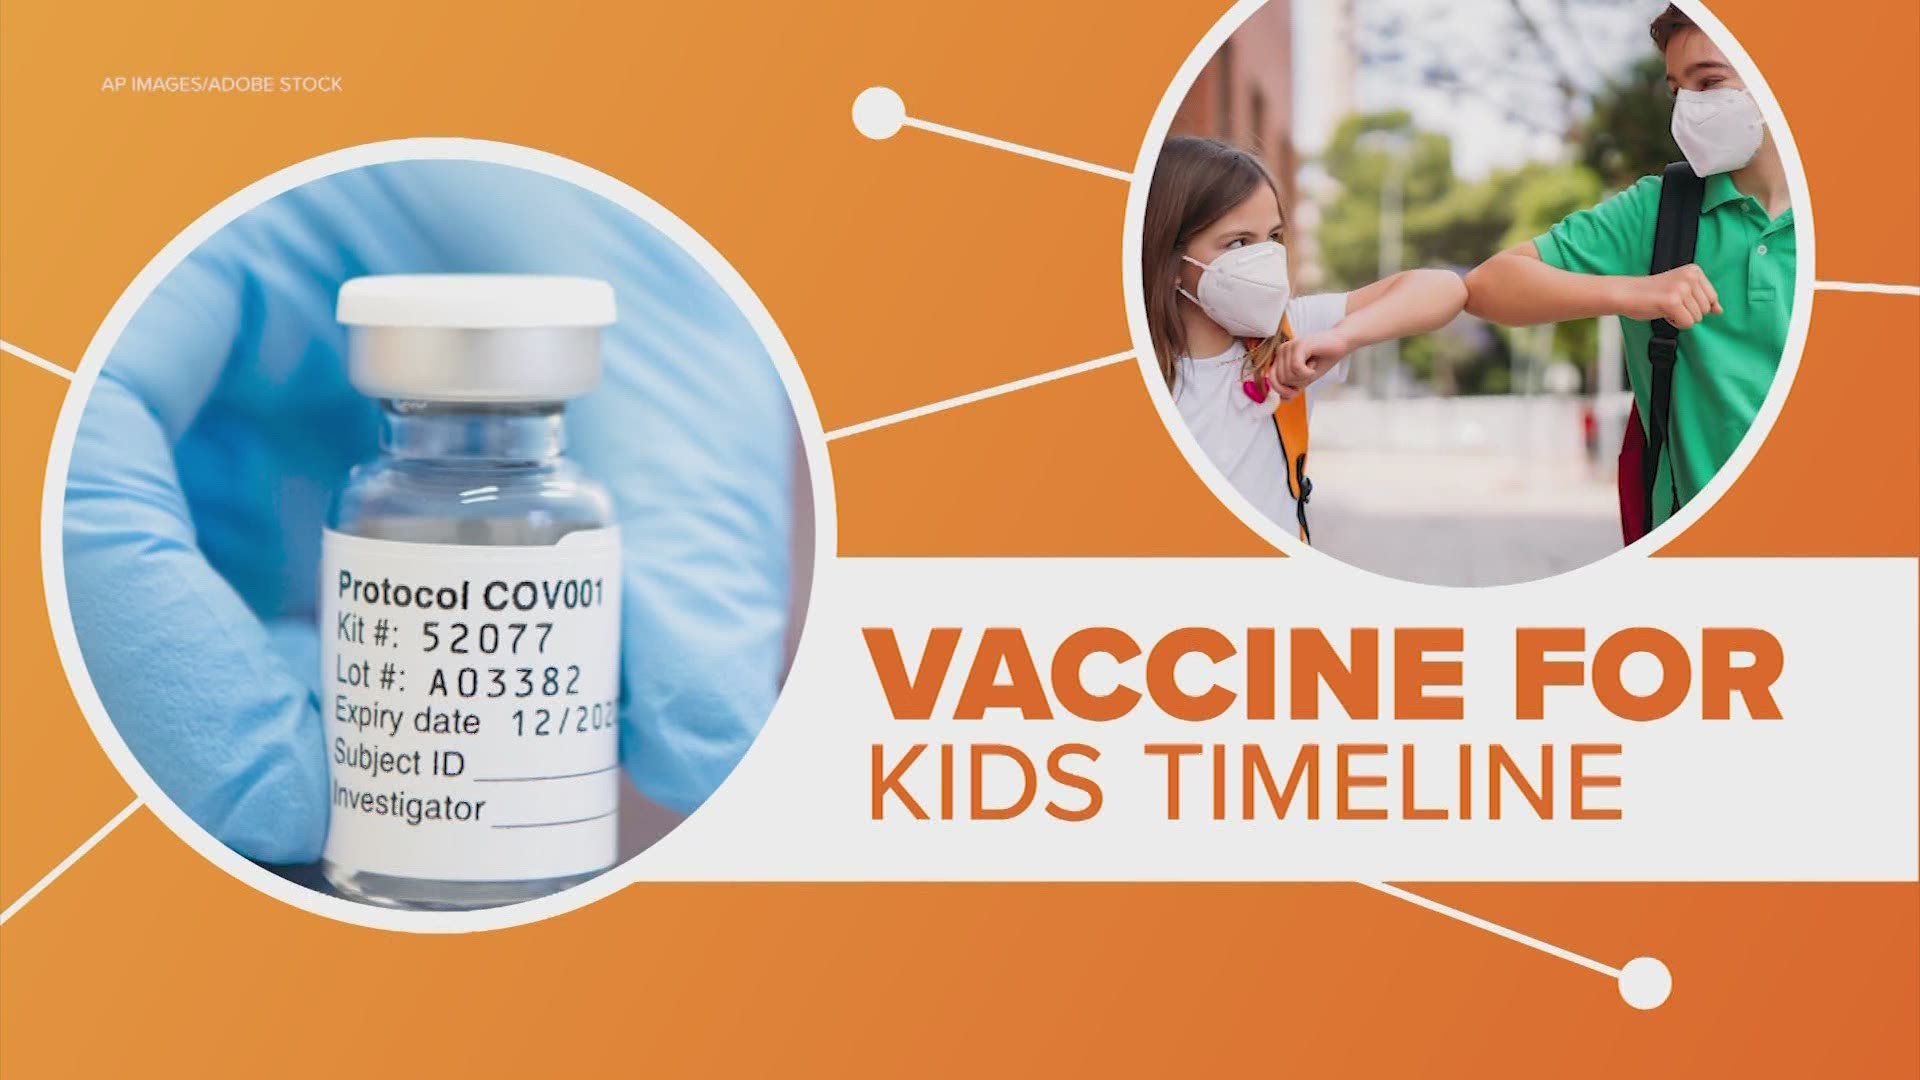 It's almost time for children to return to school, and some parents want to know why there aren't COVID-19 vaccines for kids under 12 yet.